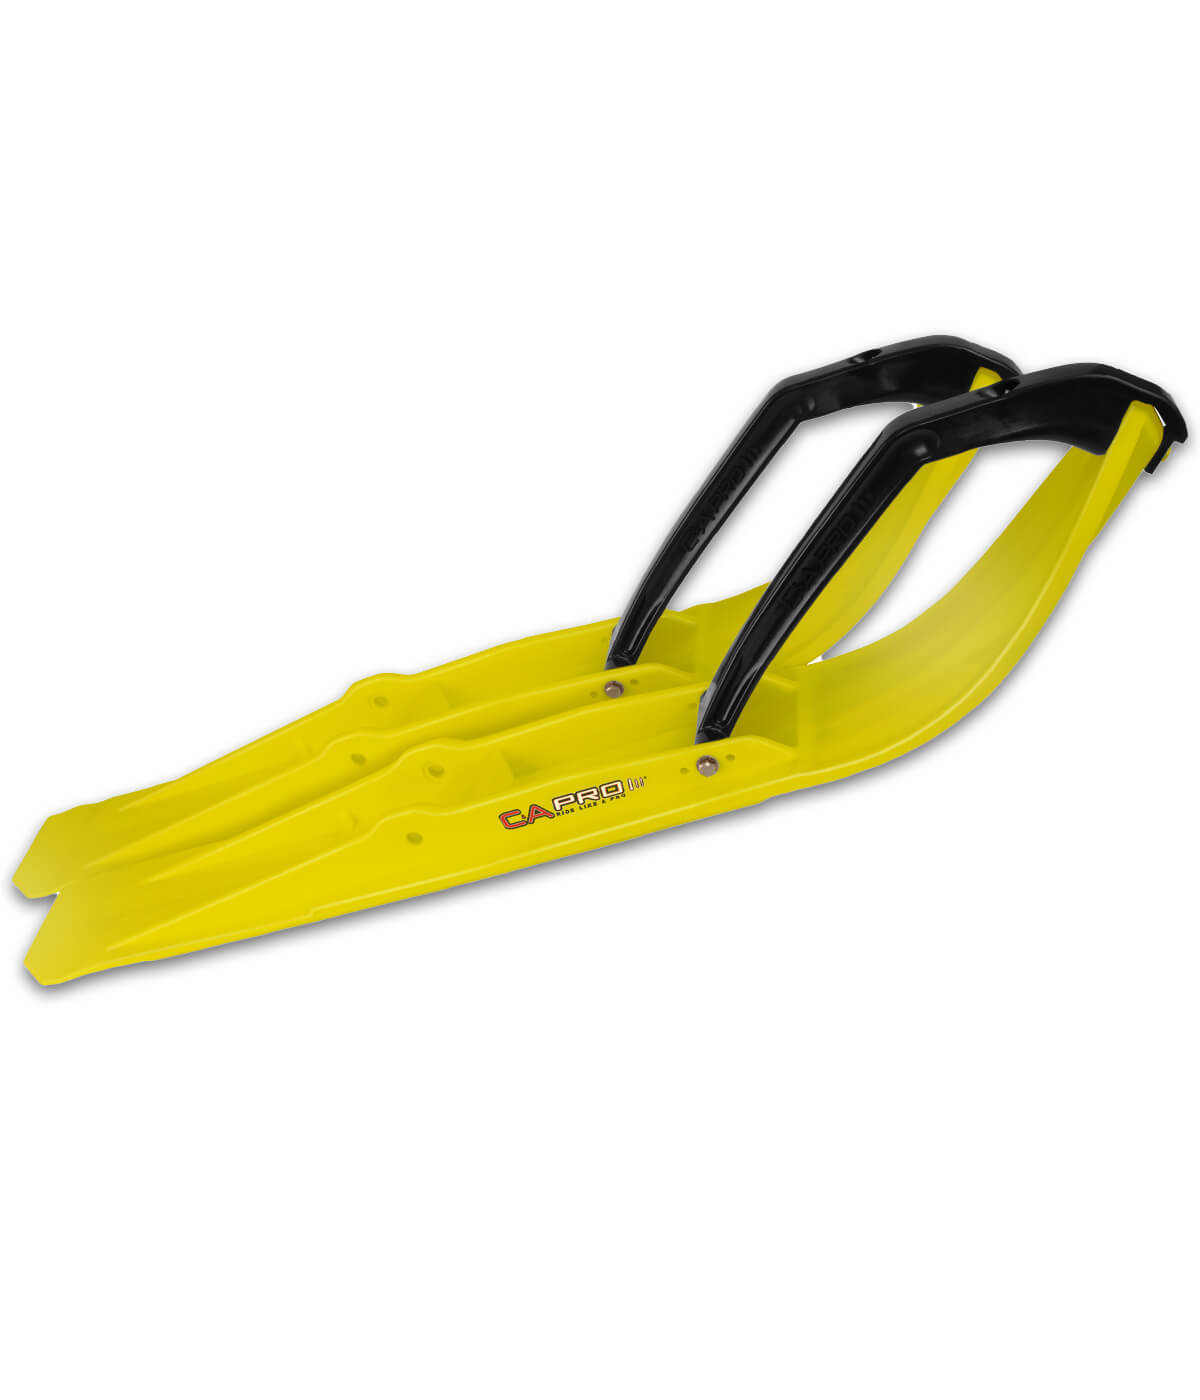 Yellow RZ skis with Black handles